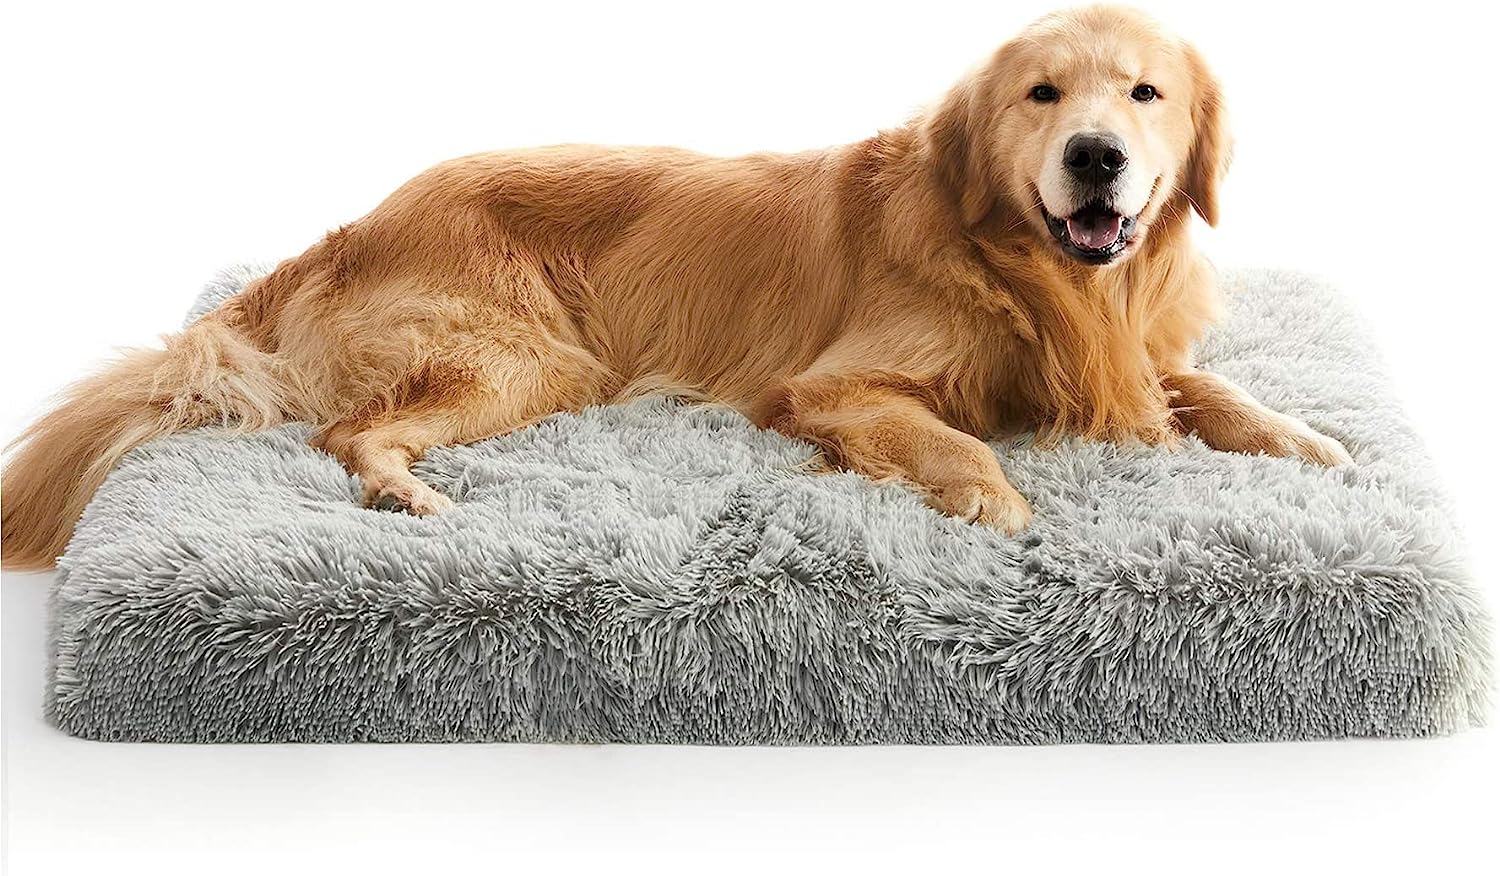 MIHIKK Orthopedic Dog Bed Luxurious Plush Washable Dog Beds with Removable Waterproof Cover Anti-Slip Egg Foam Pet Sleeping Mattress for Large Dogs Review